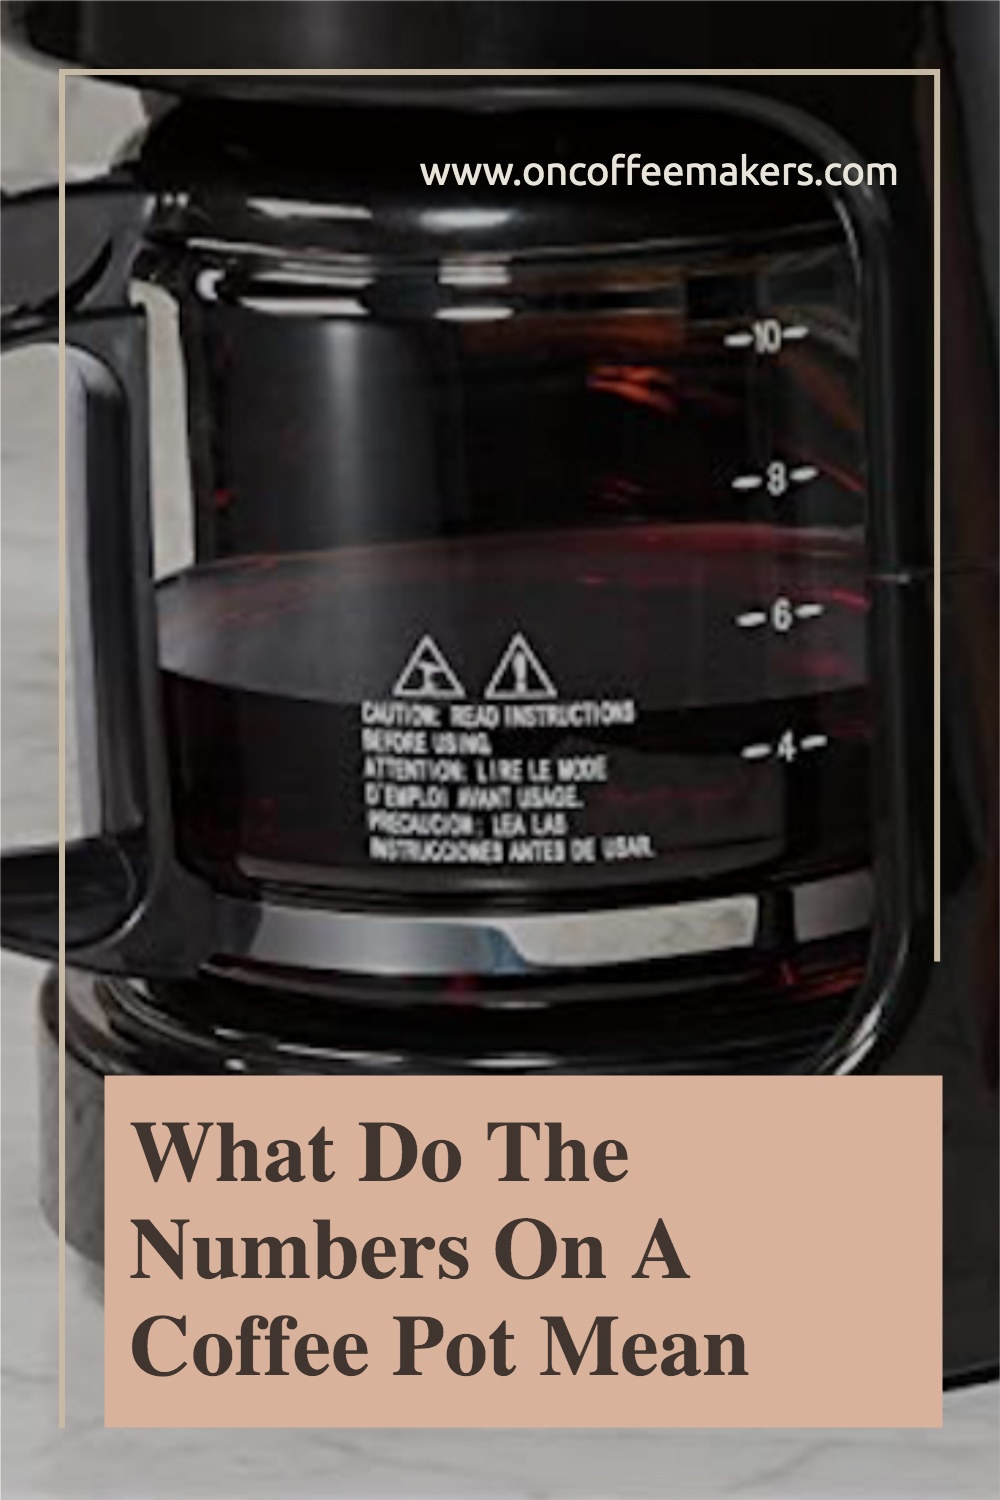 https://www.oncoffeemakers.com/images/What-Do-The-Numbers-On-A-Coffee-Pot-Mean.jpg